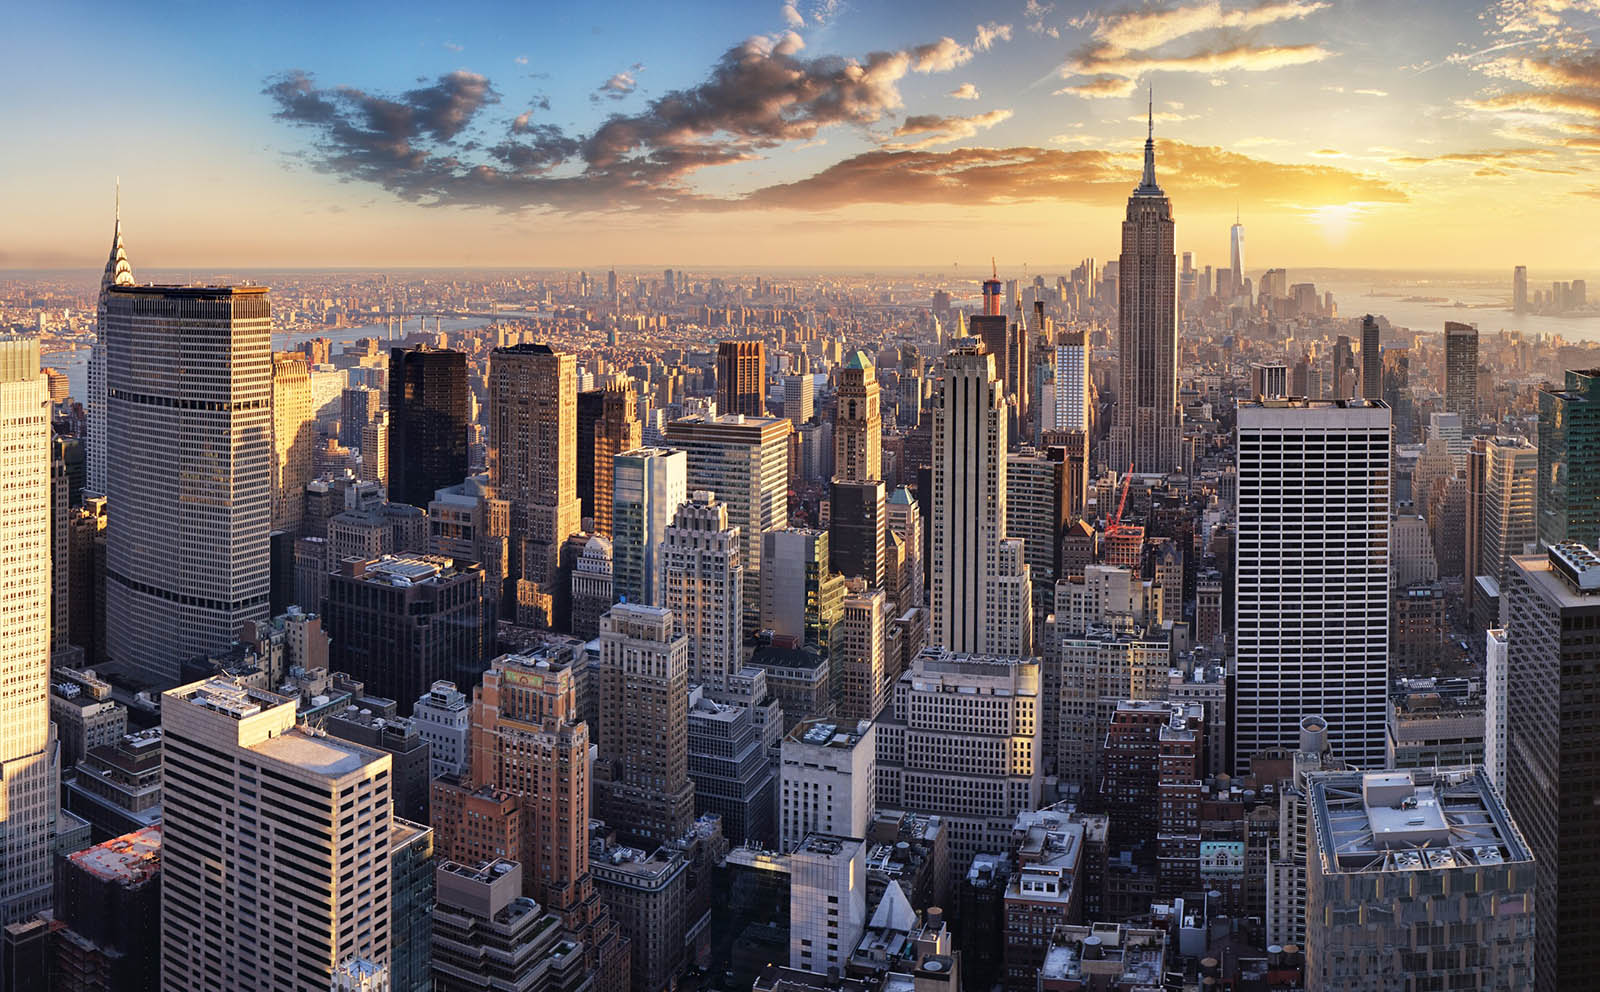 Your Random Knowledge Is Lacking If You Don’t Get 15/25 on This Quiz New York City Skyline